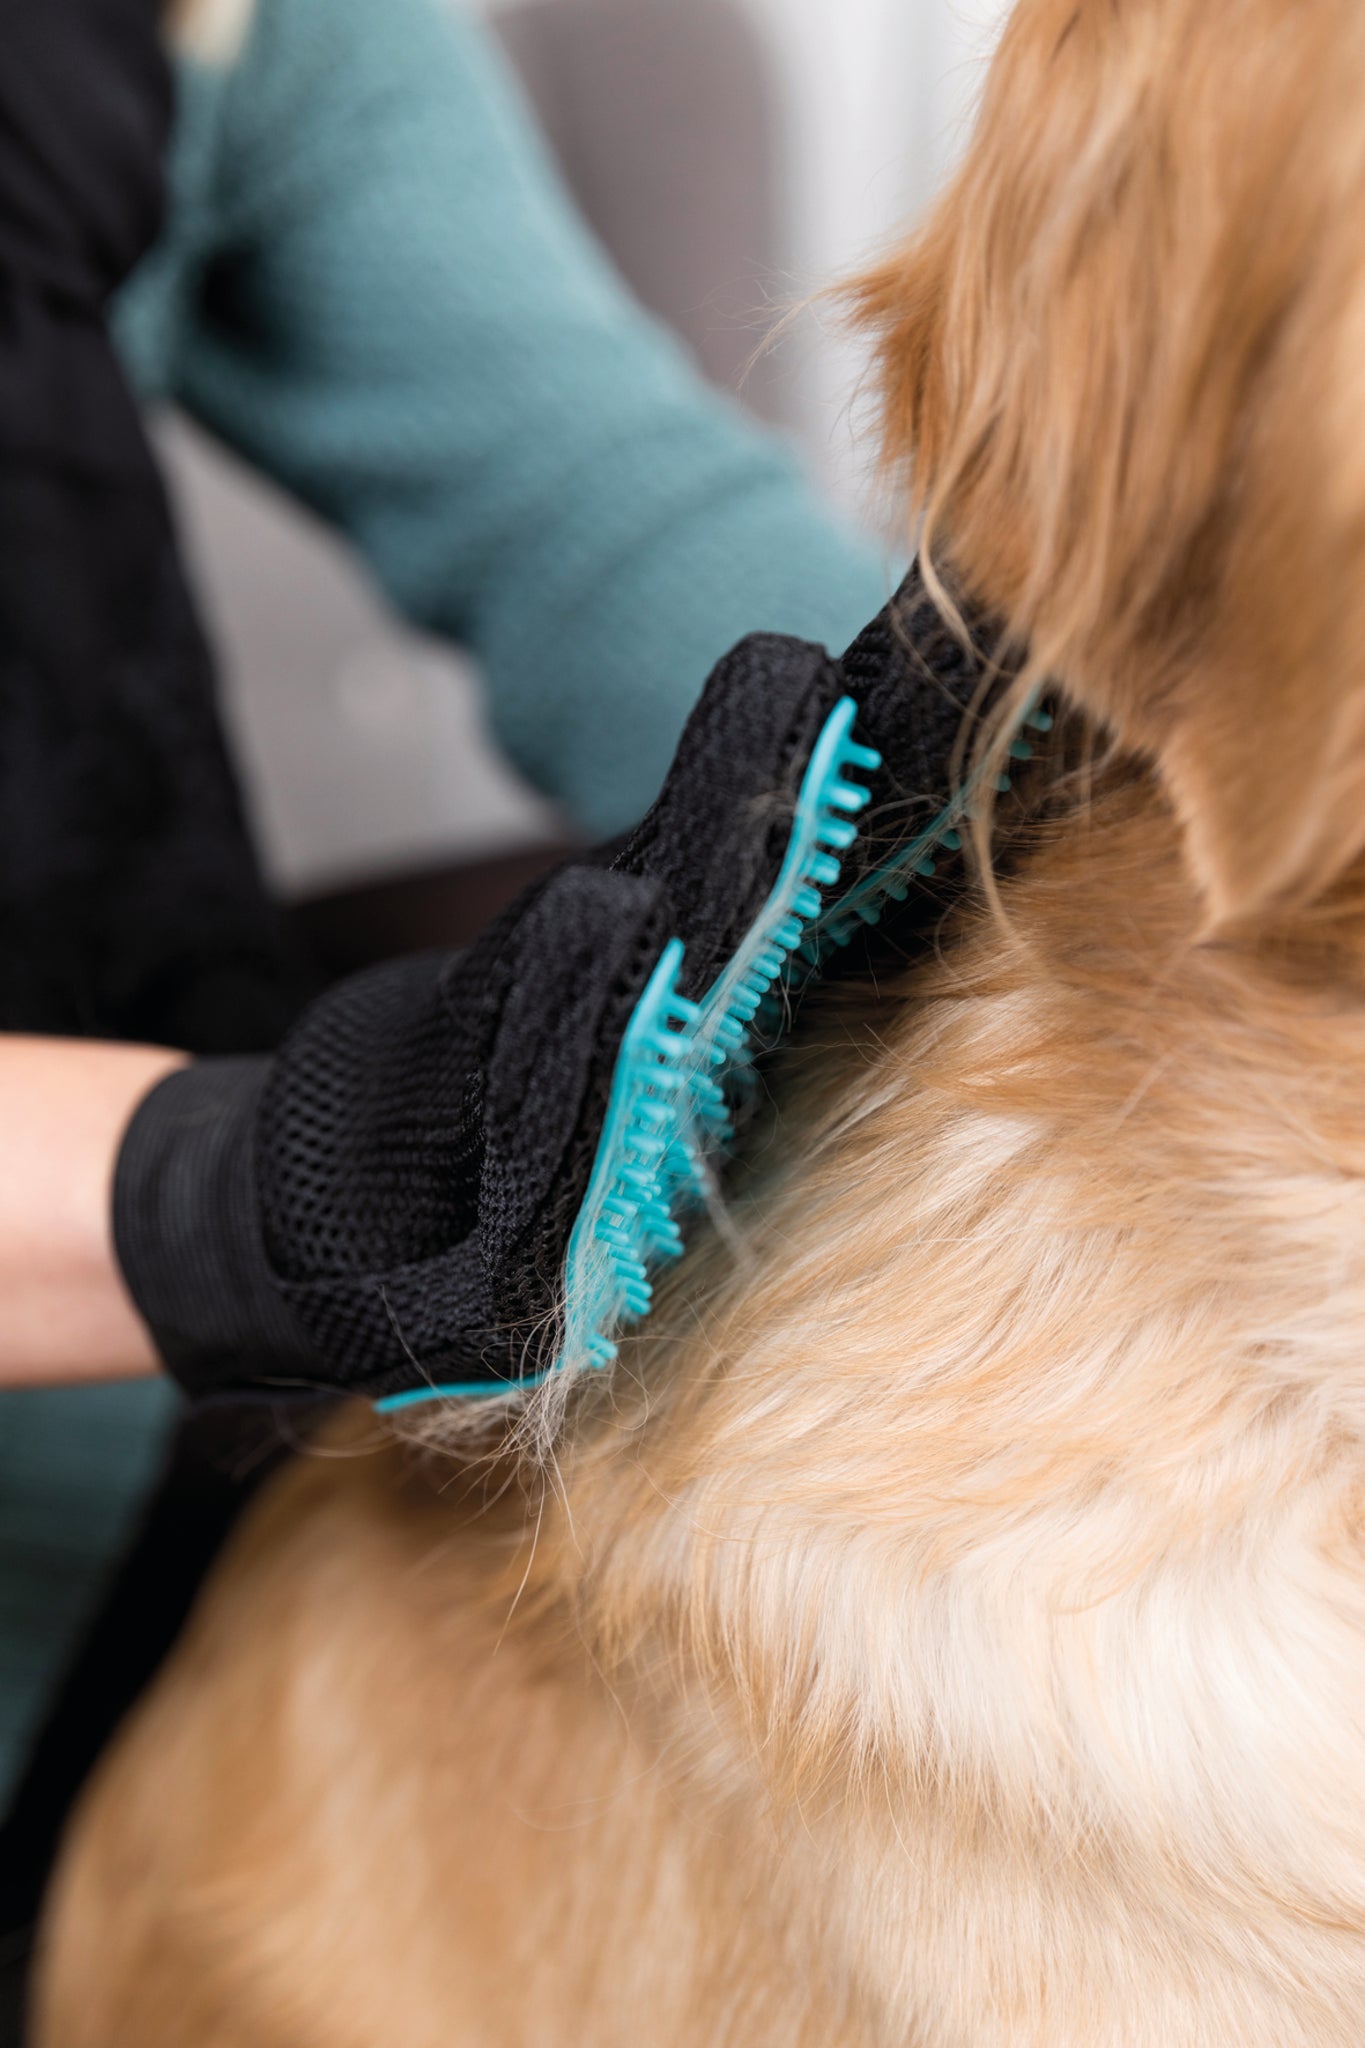 Daily Dog Coat Care Combo - Andis Slicker Brush + Trixie Fur Care Glove